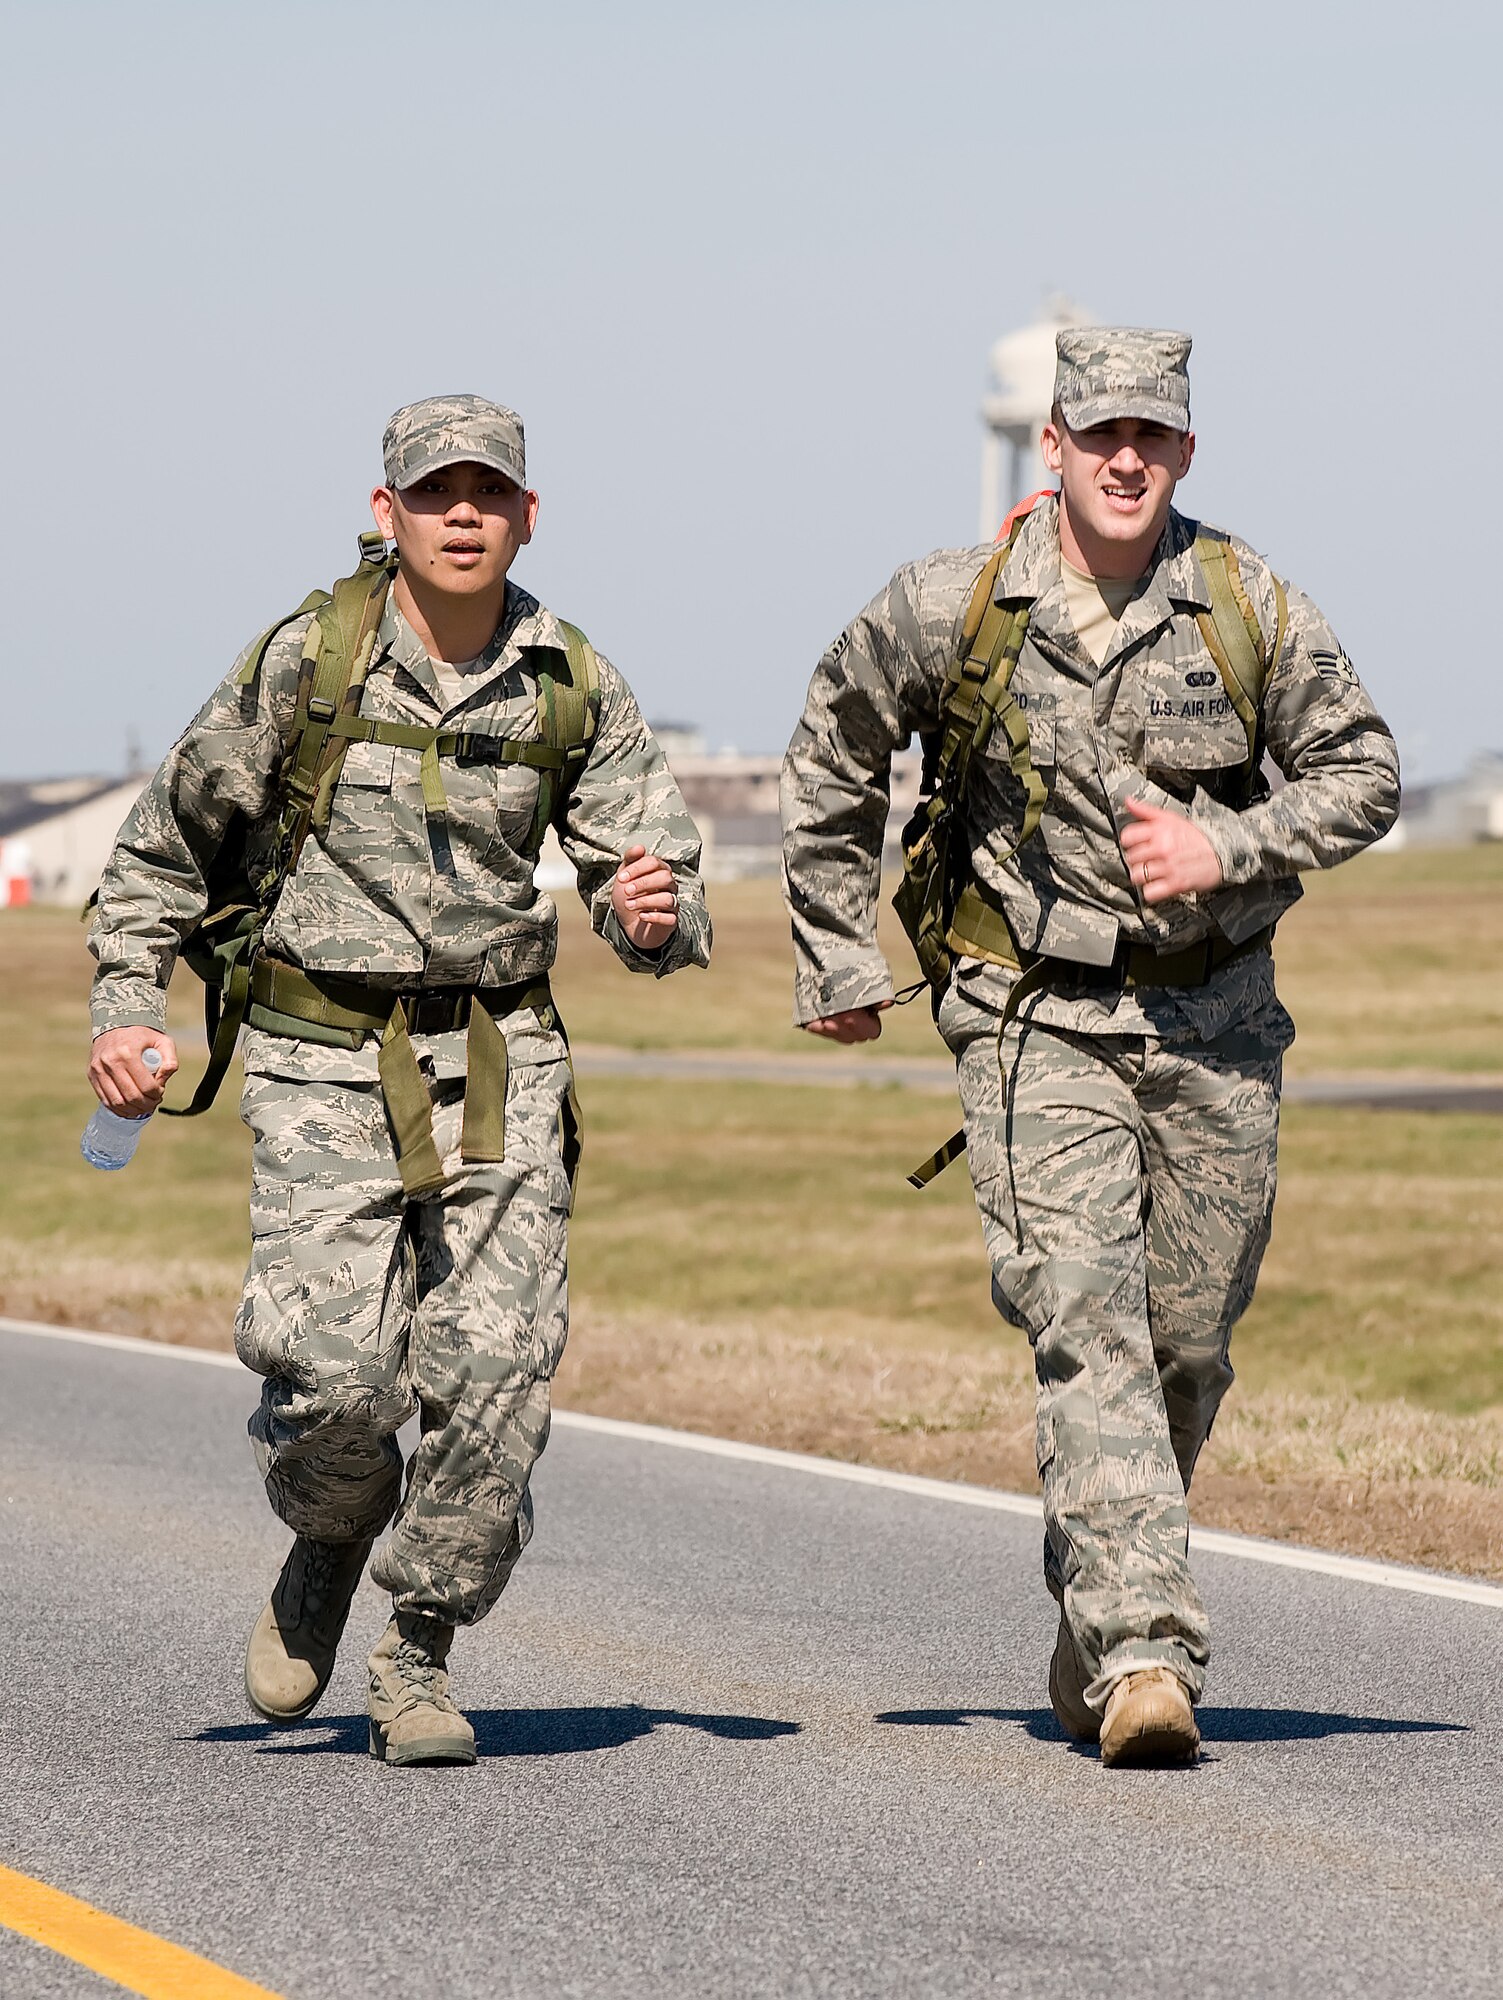 Staff Sgt. Herbert Dungca (left) and Senior Airman Jonathan Howard, Air Force Mortuary Affairs Operations Center Dignified Transfer team members, pick up the pace during the 436th Security Forces Squadron's 11th Annual Ruck March held March 20. The annual 6.2 mile march is a fundraiser to honor the veterans of the Korean War who fought in the Battle of the Chosin Reservoir. (U.S. Air Force photo/Jason Minto)